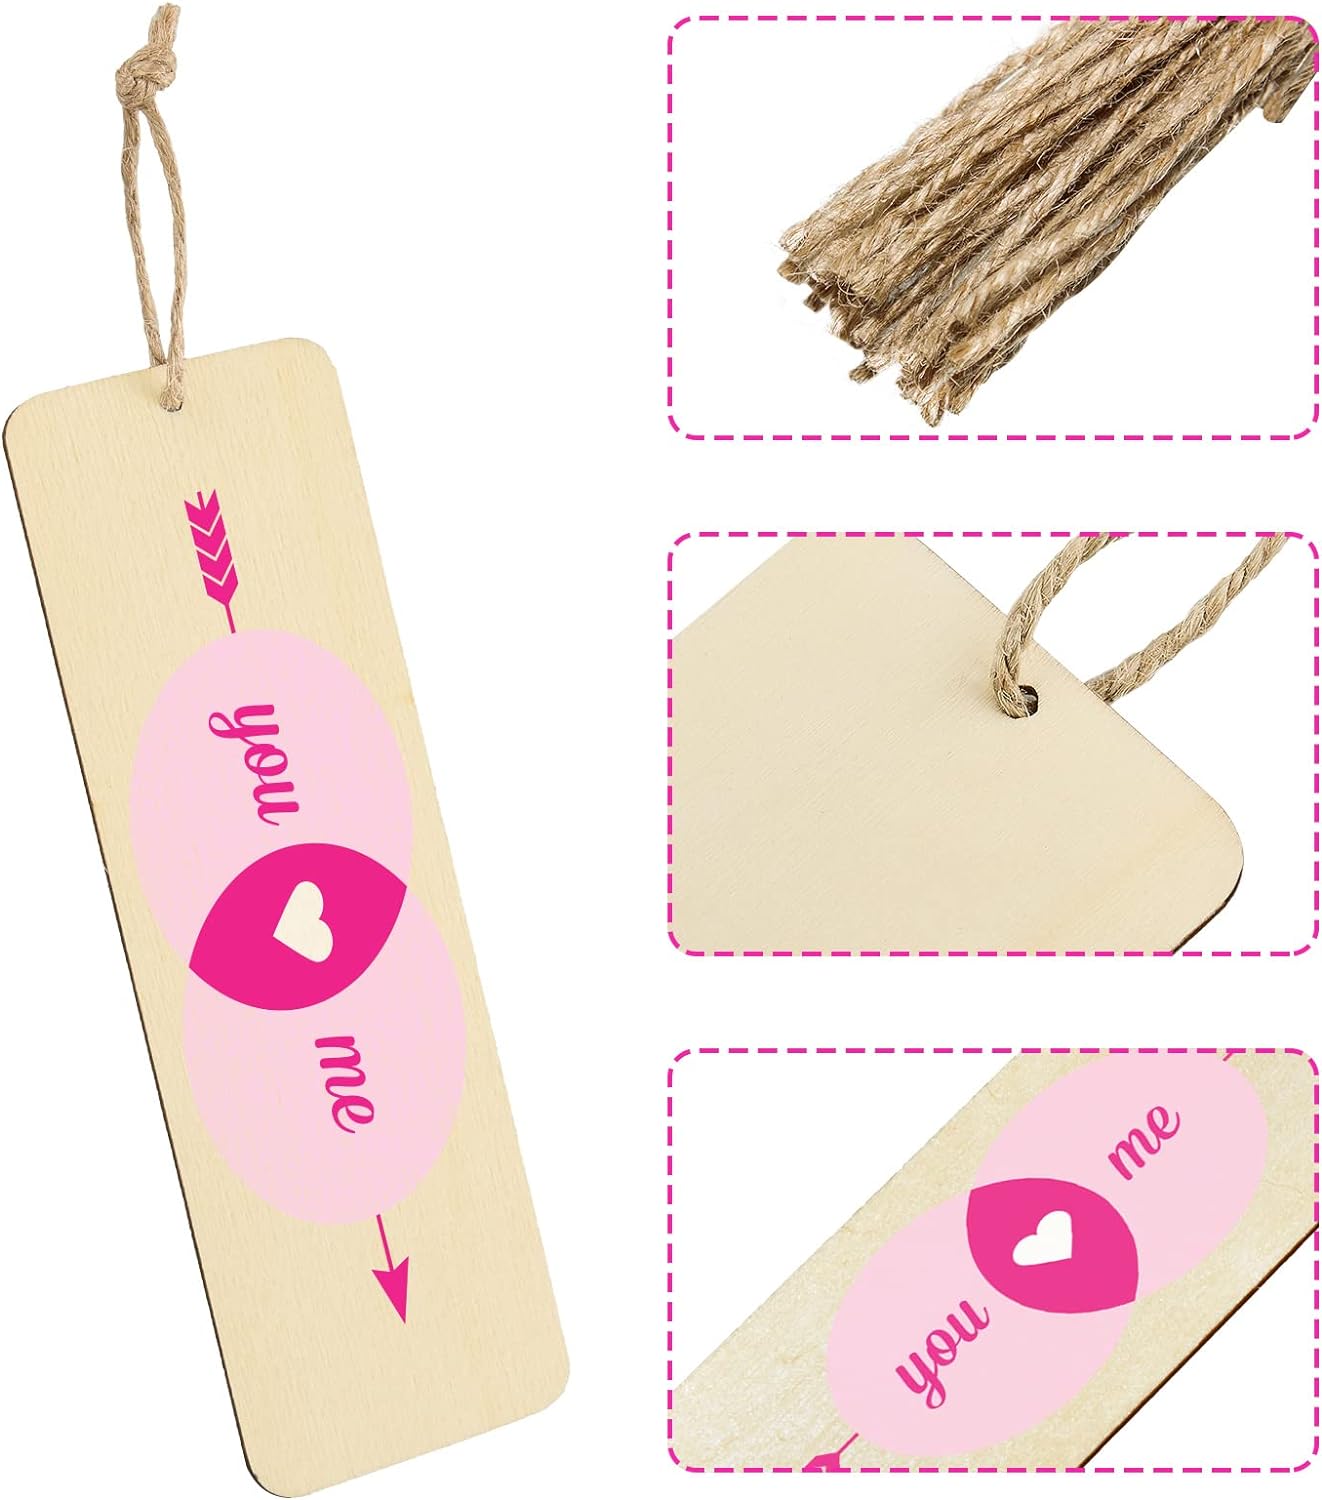 36 Unfinished Wood Blank Bookmarks Hanging Tags with Holes and Ropes 6 x 2 Inch